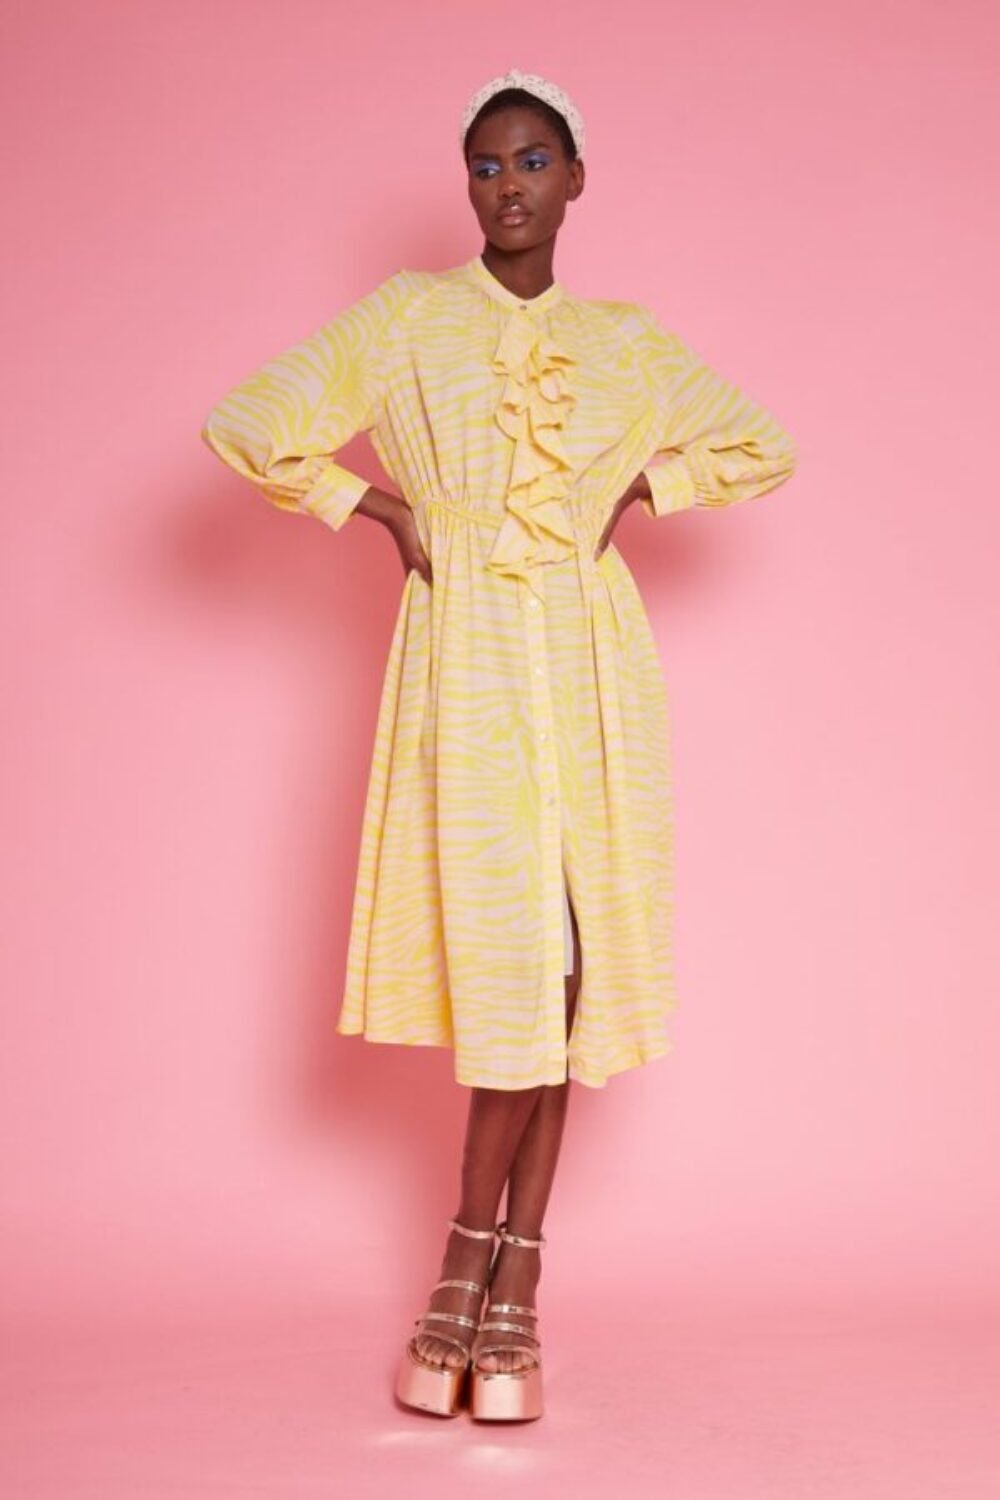 Shop Lux Yellow Silk Blend Zebra Print Maxi Dress and women's luxury and designer clothes at www.lux-apparel.co.uk